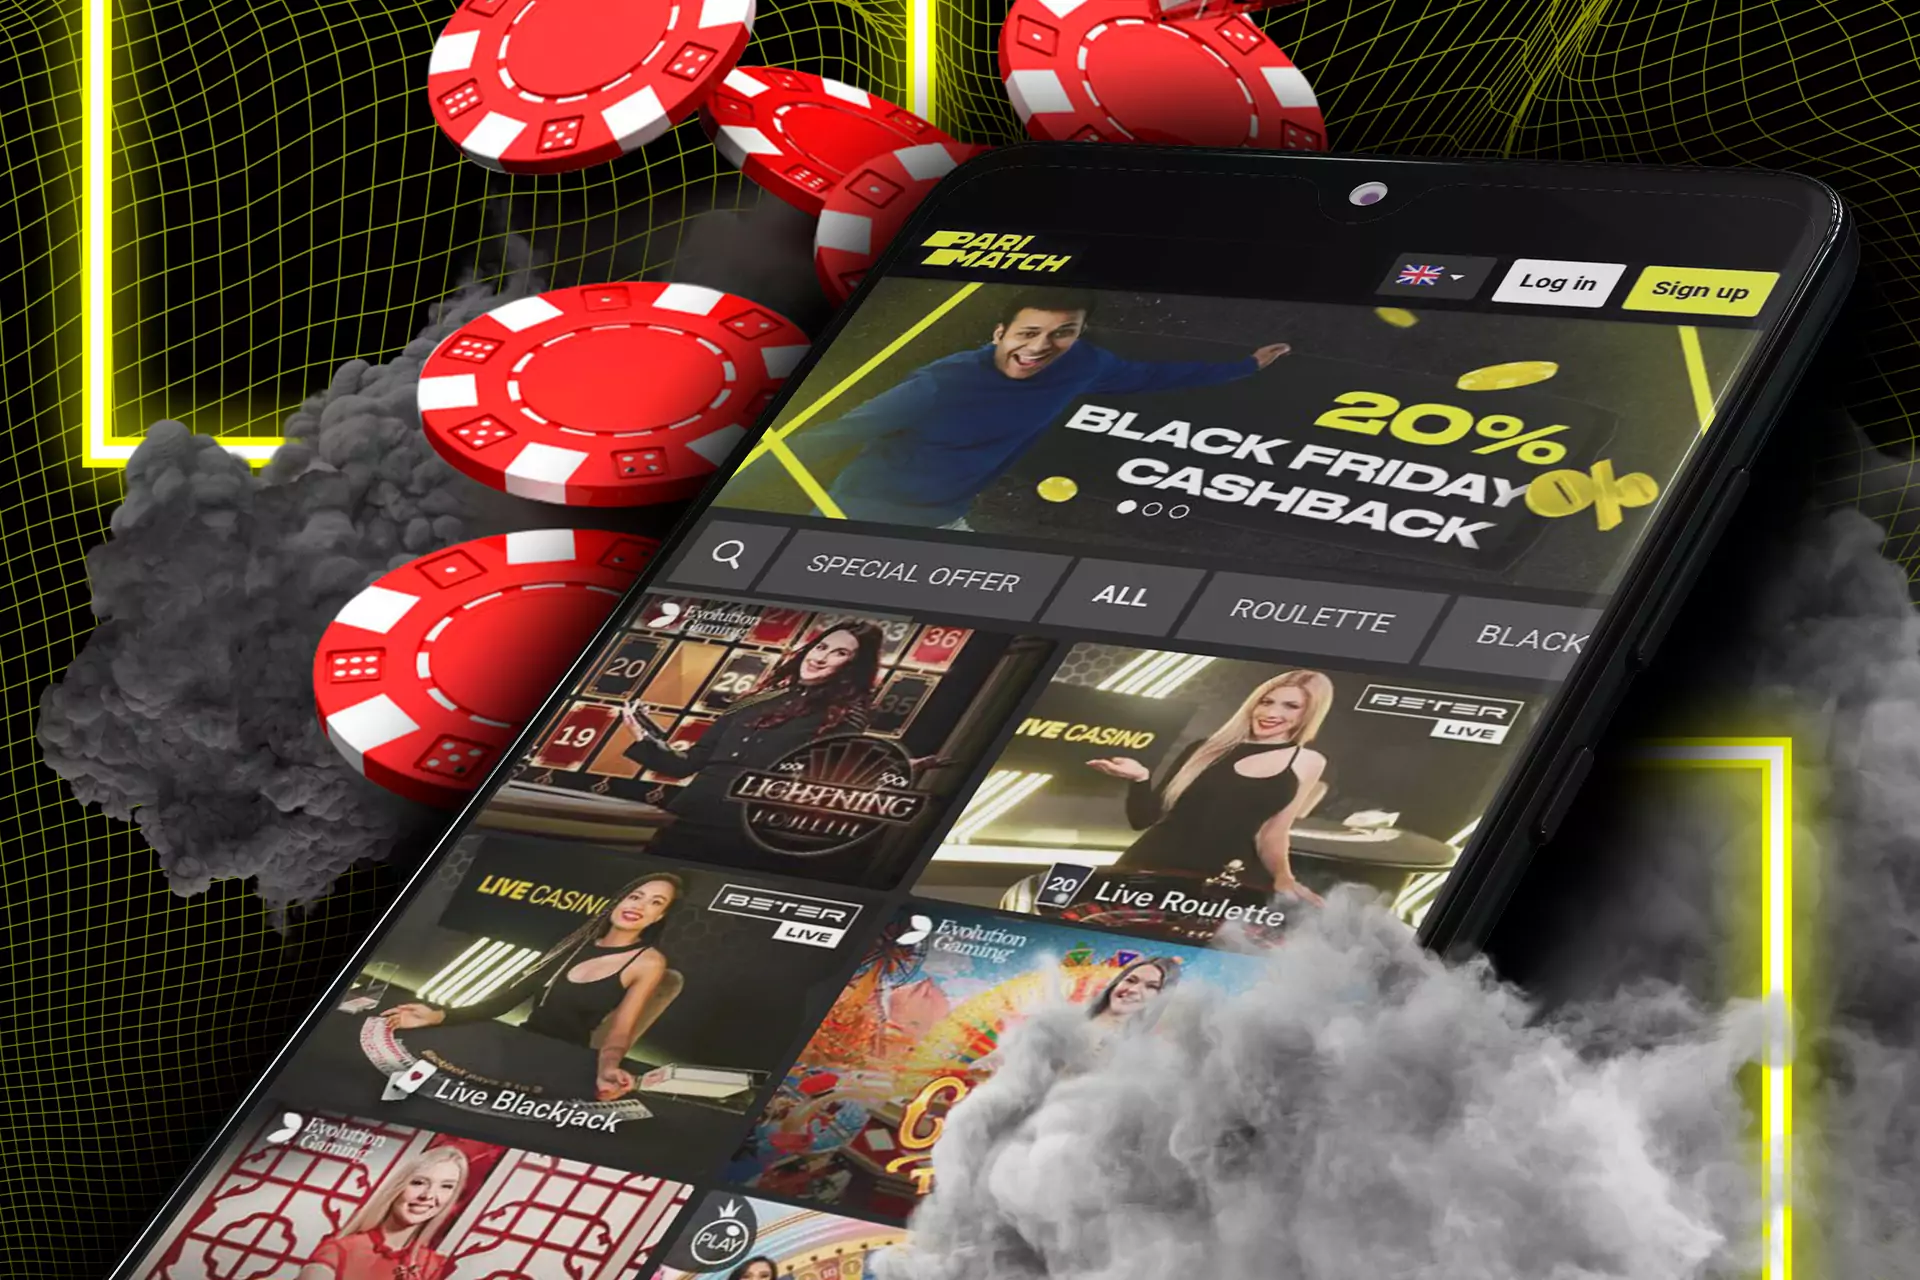 You can download the Parimatch app for your Android device to be able to play casino games from anywhere.